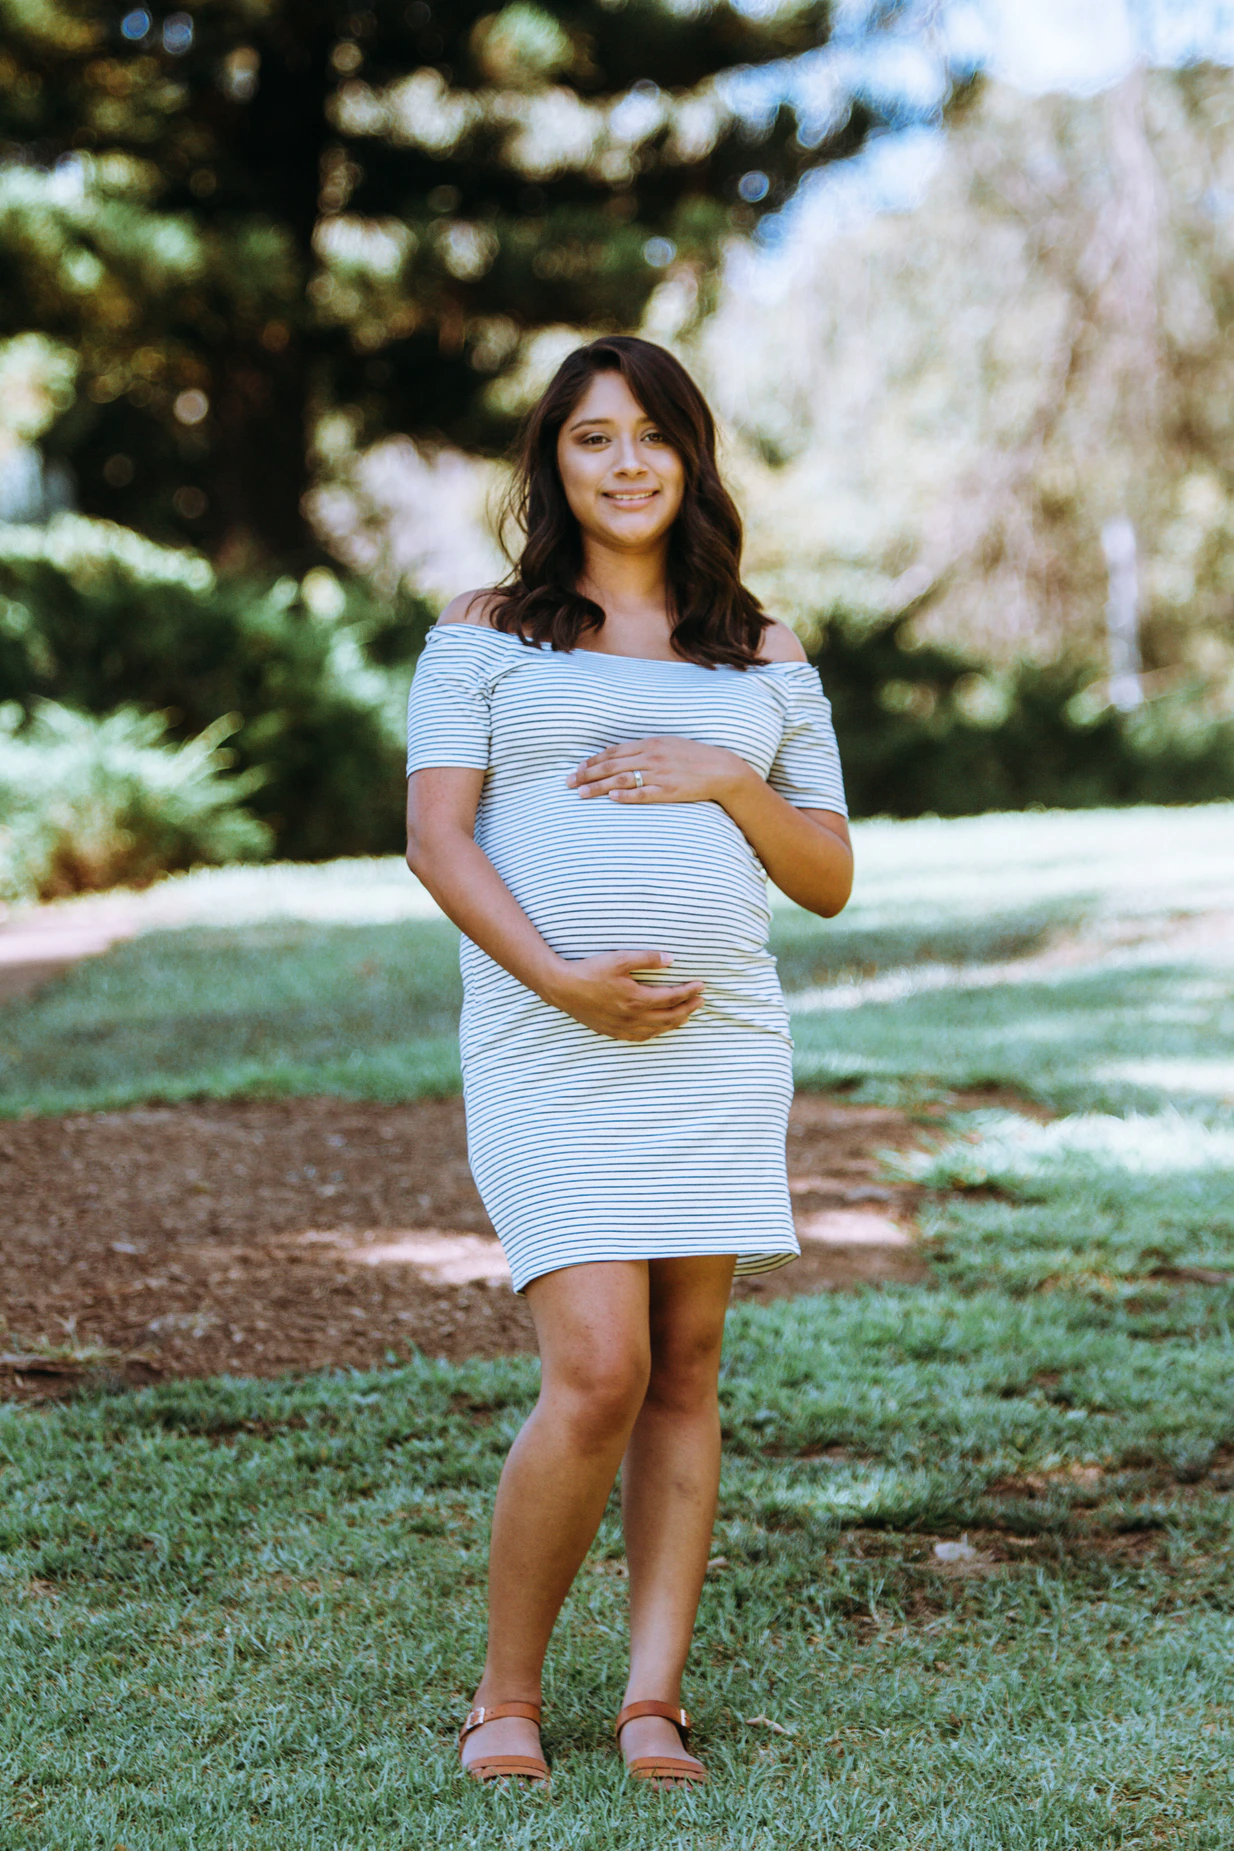 A pregnant woman with medium skin tone and long, dark hair stands outside with her arms encircling her belly.